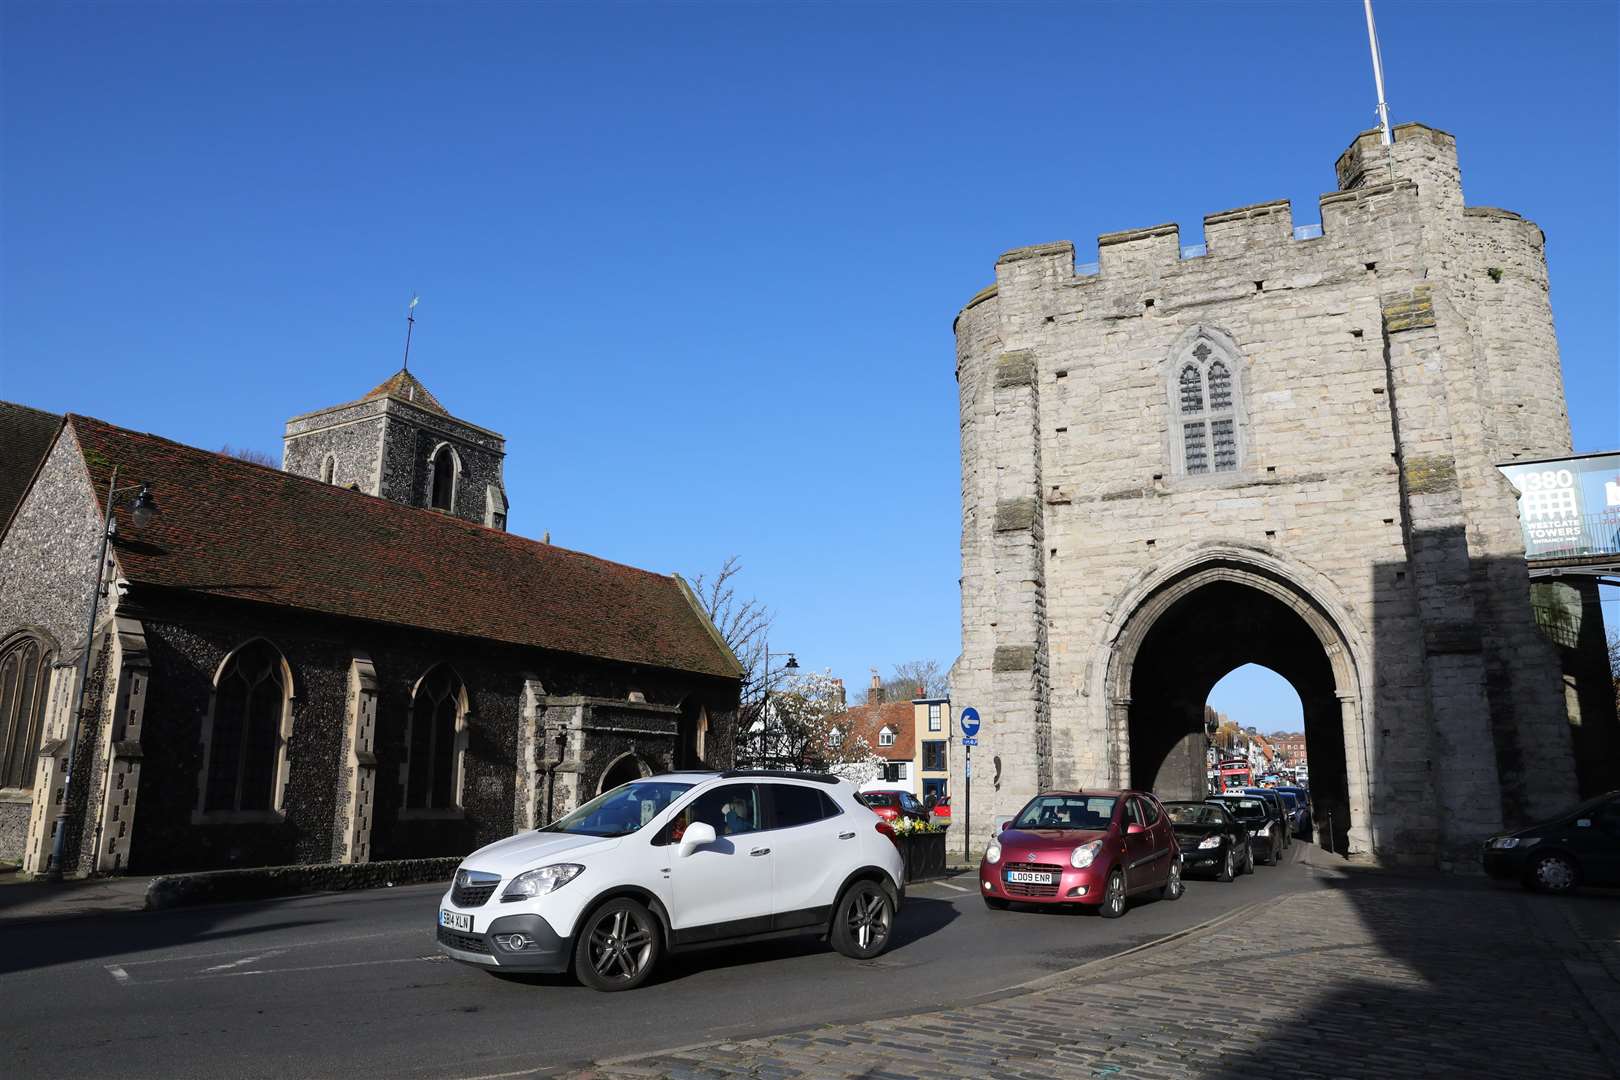 The area outside Westgate Towers could become a new square which would be more pedestrian-friendly, while the Guildhall will become a city welcome centre